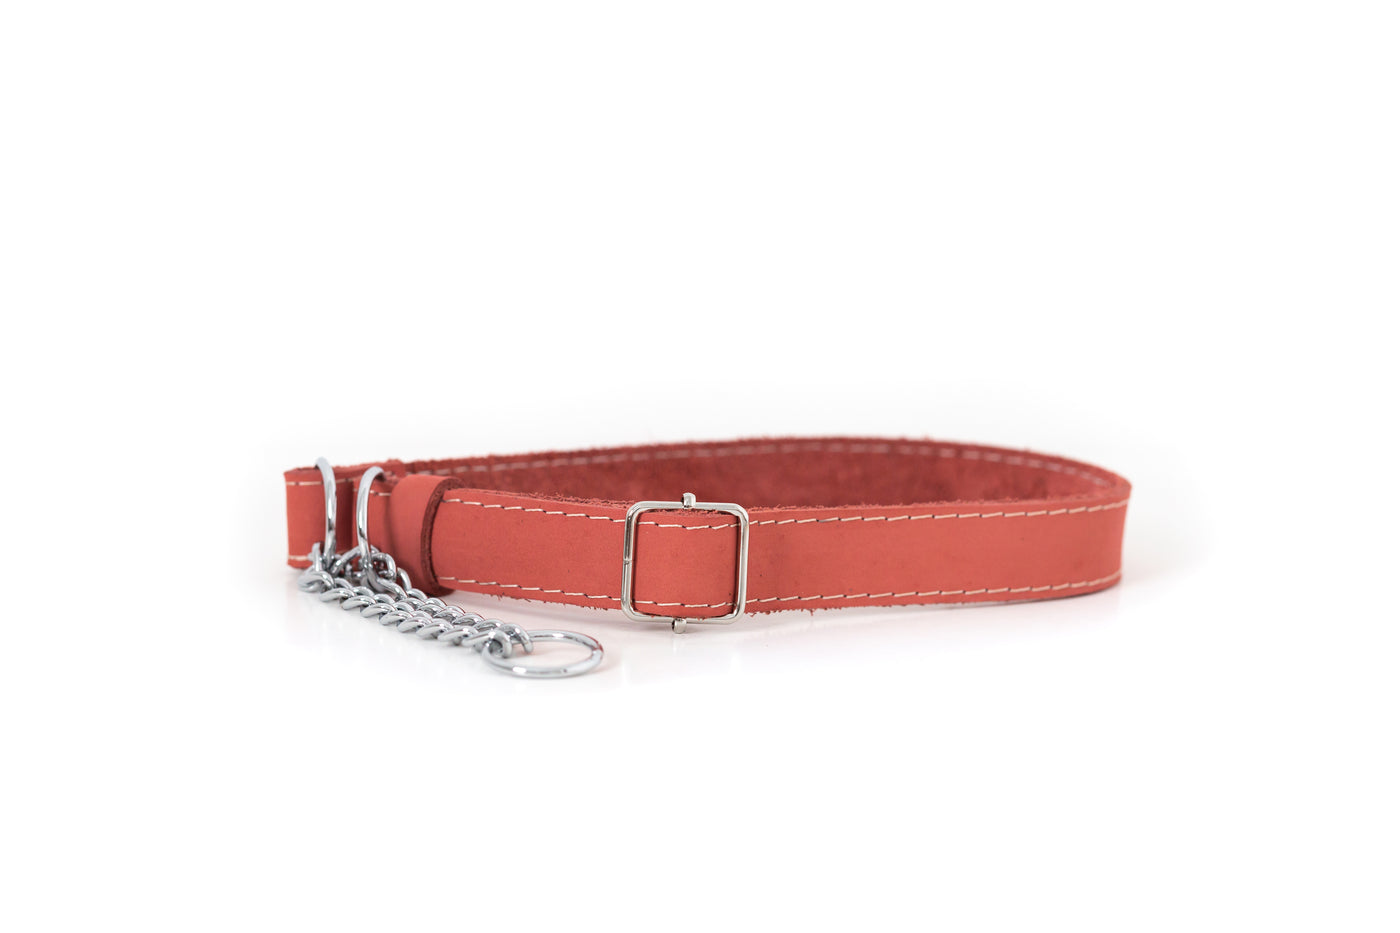 Euro Dog Soft Leather Dog Collar Martingale Made in USA Affordable Luxury